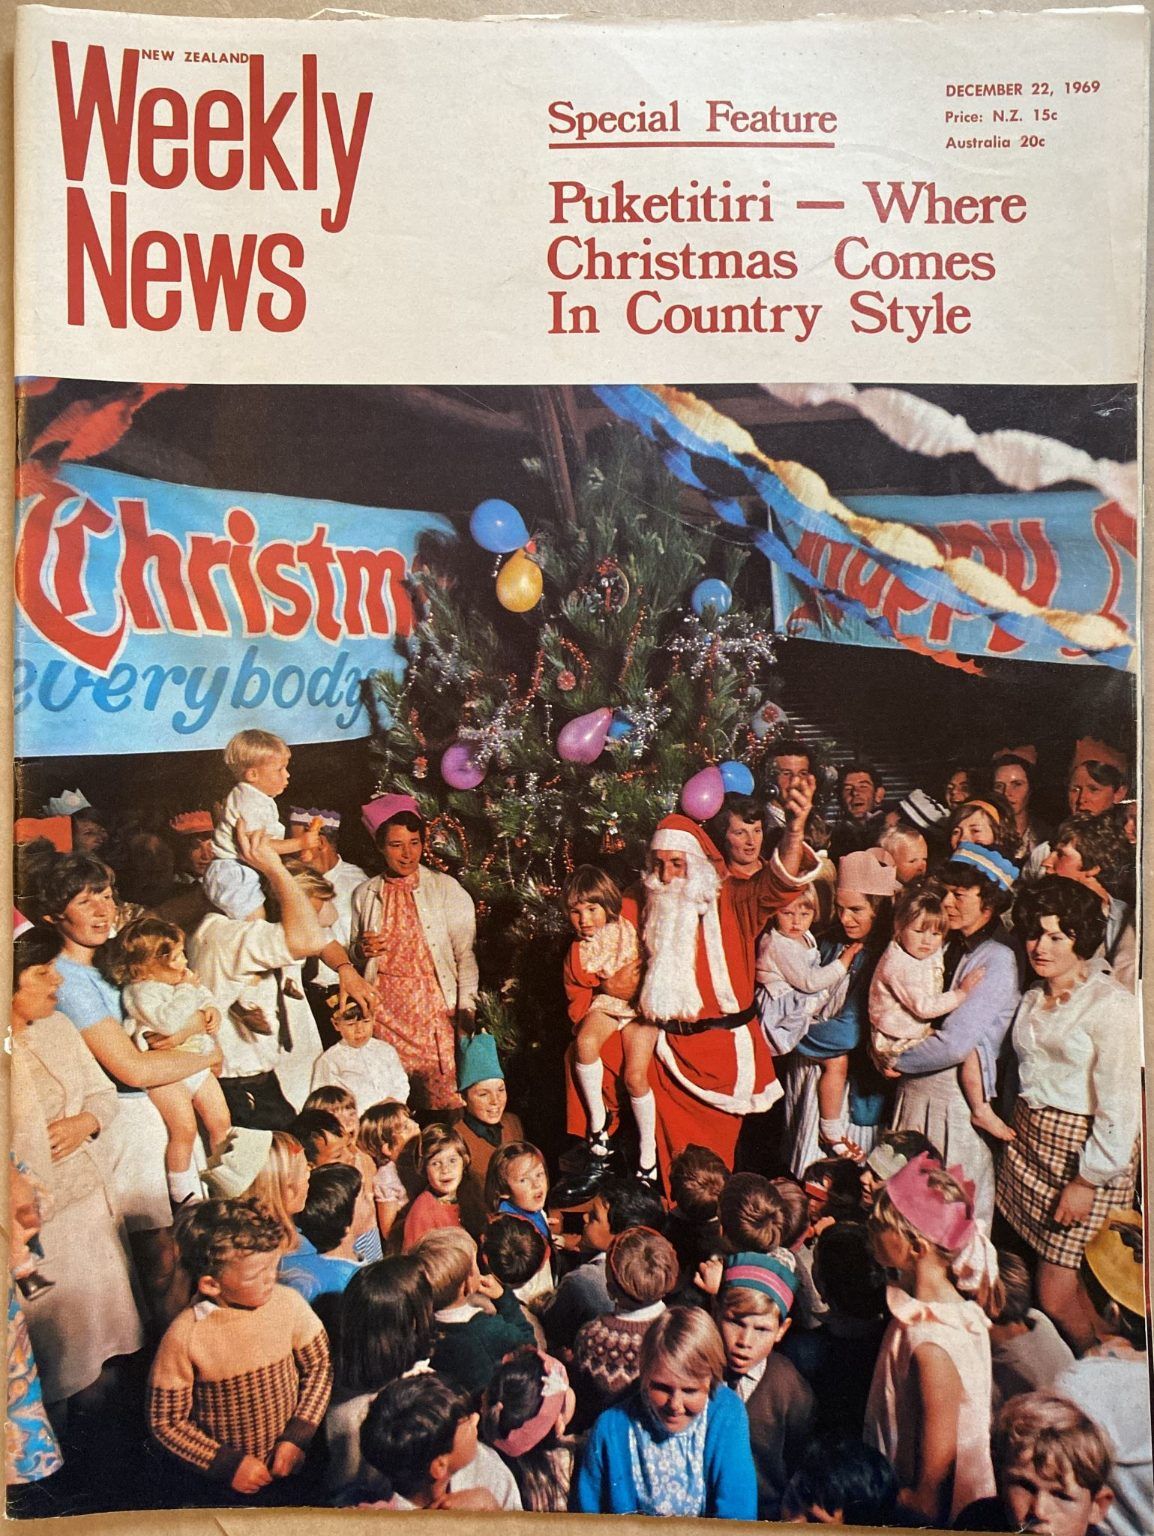 OLD NEWSPAPER: New Zealand Weekly News, No. 5534, 22 December 1969